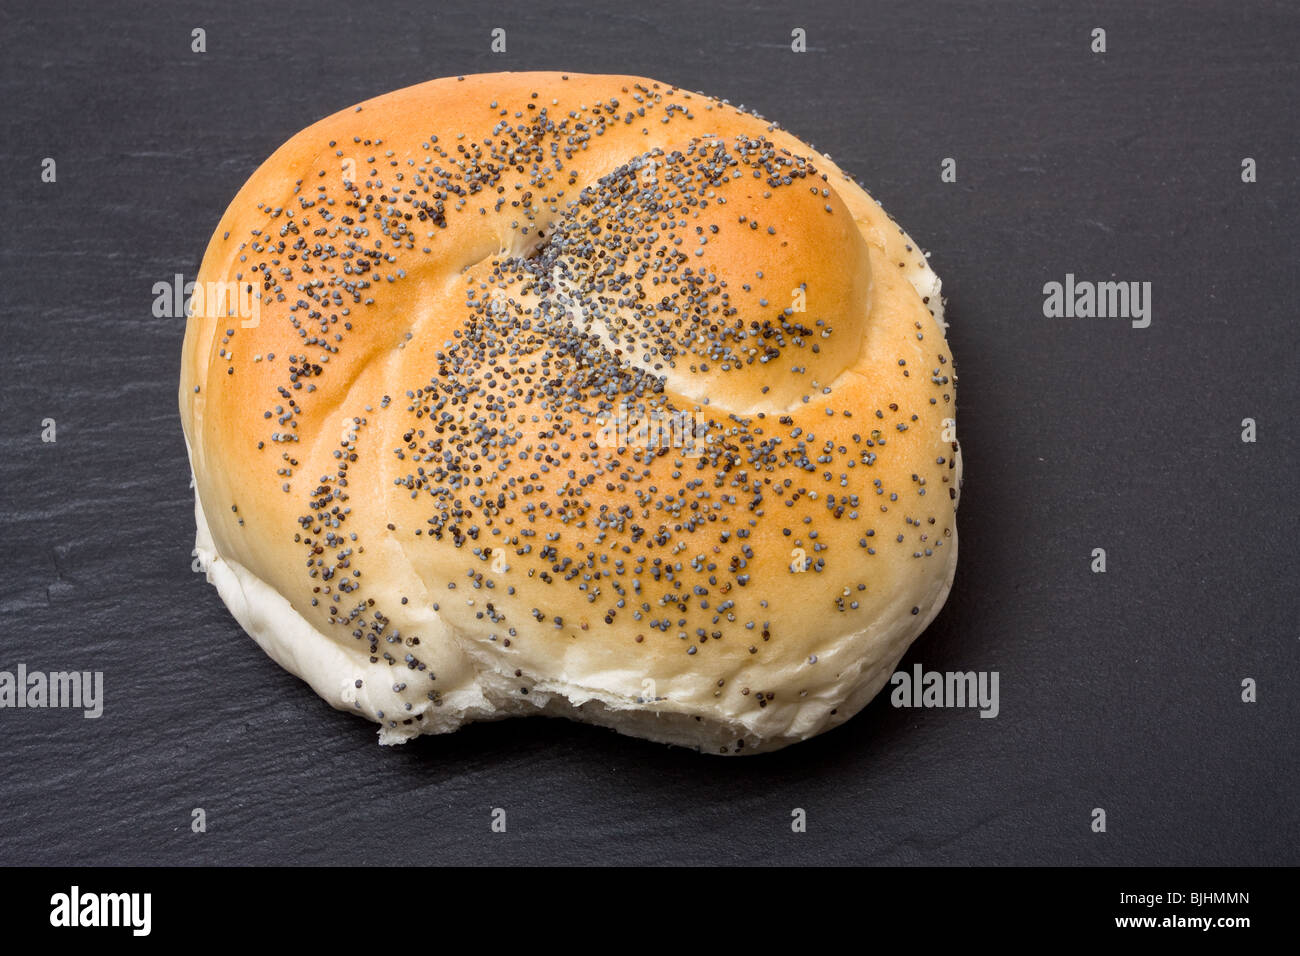 Seeded bread roll from high viewpoint against dark slate background. Stock Photo